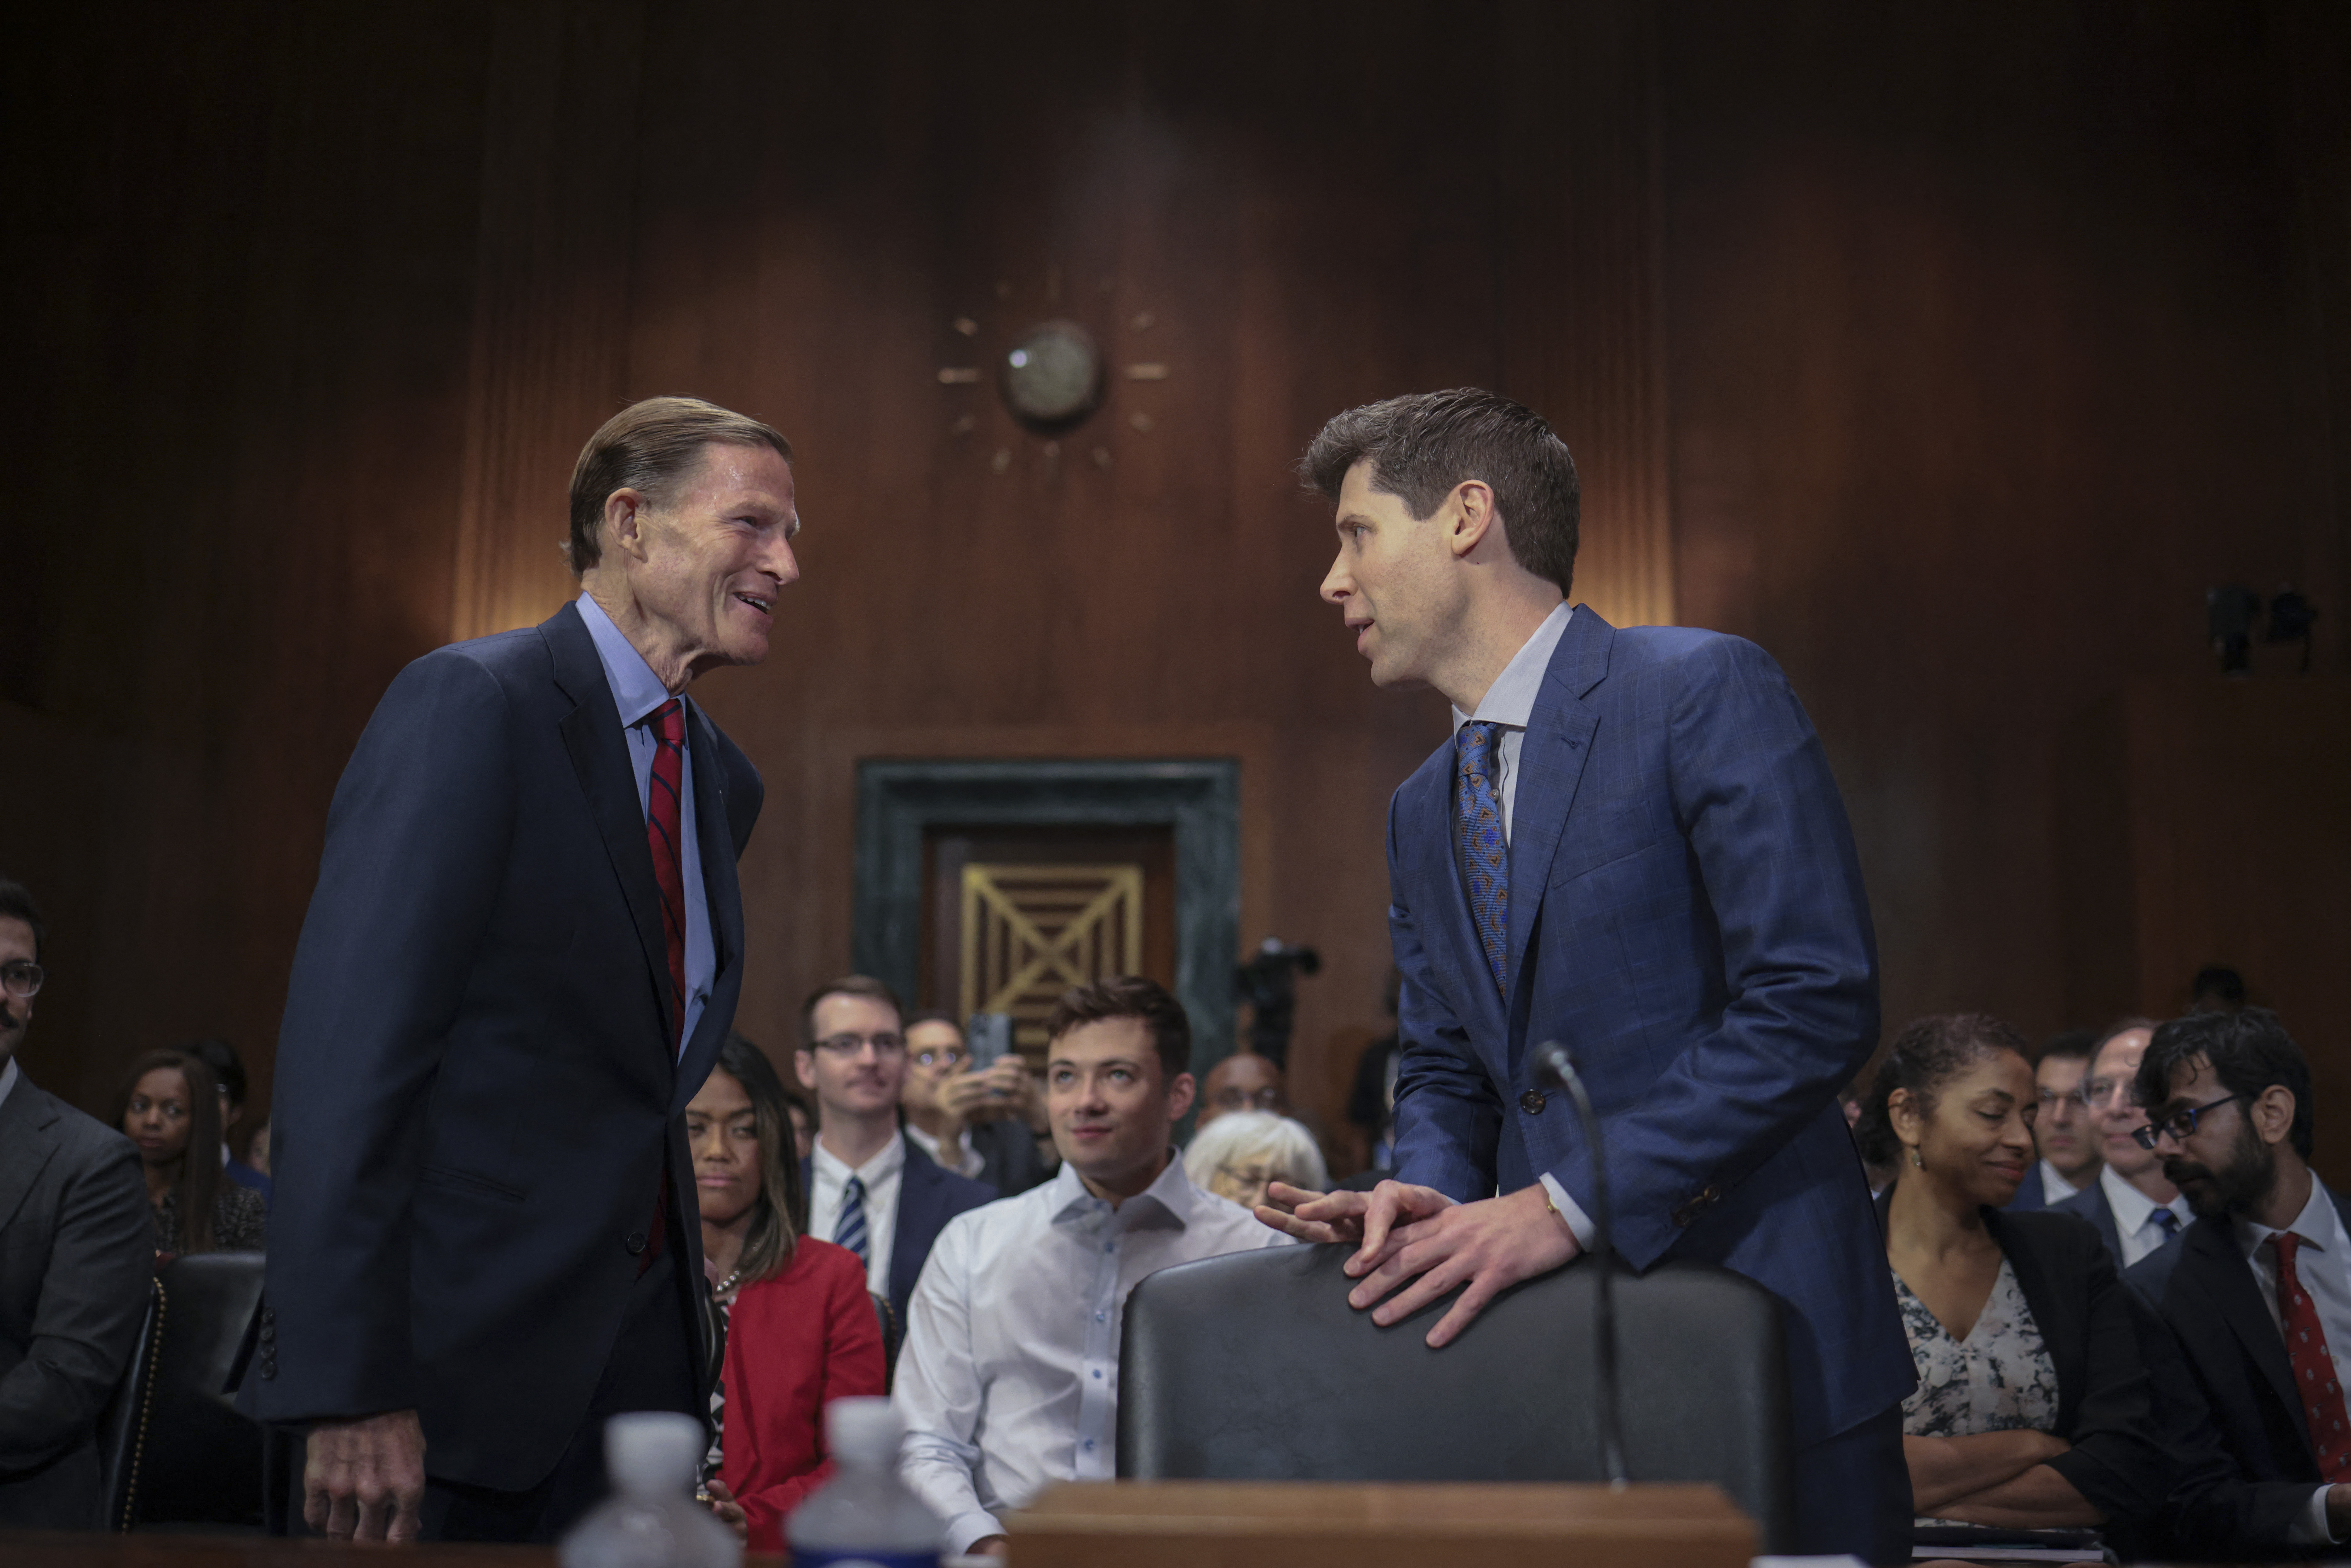 WASHINGTON, DC - MAY 16: Samuel Altman, CEO of OpenAI, greets committee chairman Sen. Richard Blumenthal (D-CT) while arriving for testimony before the Senate Judiciary Subcommittee on Privacy, Technology, and the Law May 16, 2023 in Washington, DC. The committee held an oversight hearing to examine A.I., focusing on rules for artificial intelligence. Win McNamee/Getty Images/AFP (Photo by WIN MCNAMEE / GETTY IMAGES NORTH AMERICA / Getty Images via AFP)